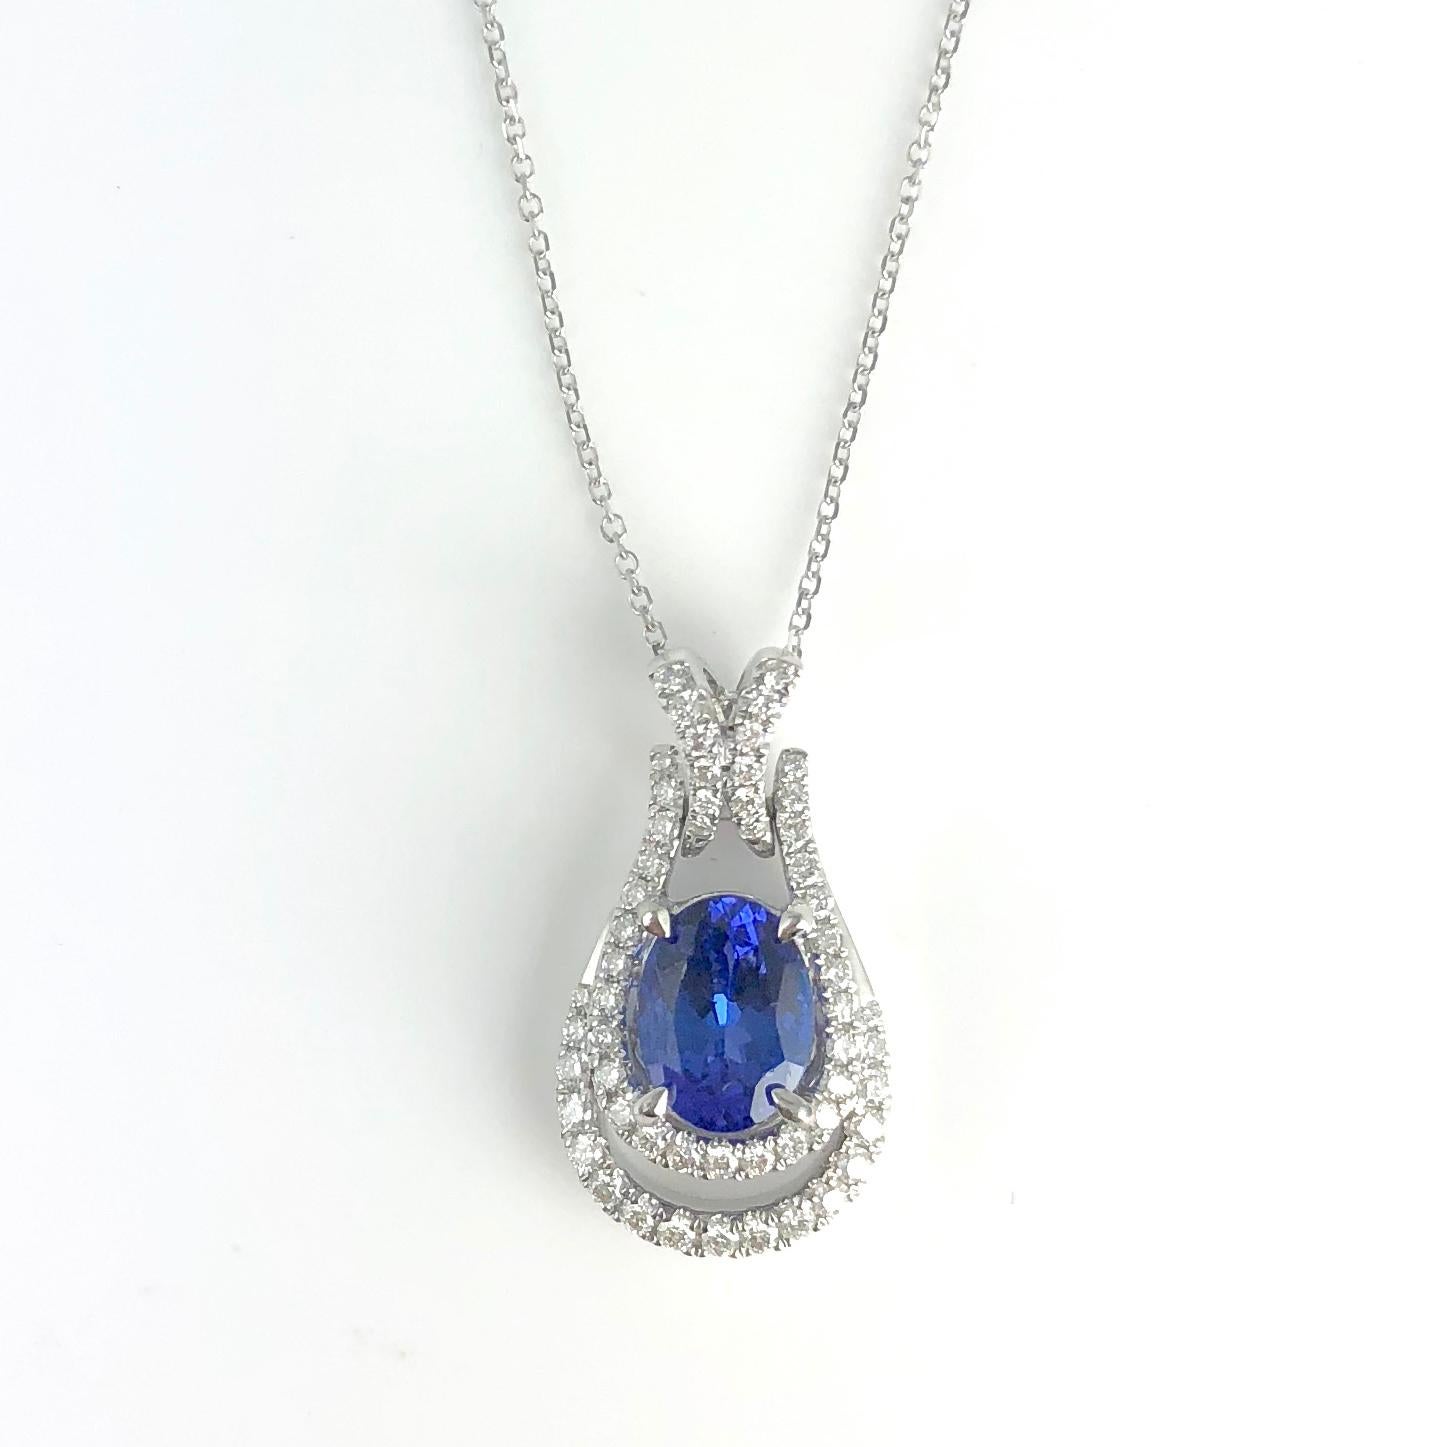 (DiamondTown) This sweet pendant features a 1.44 carat oval cut vivid blue tanzanite center, sitting in two loops of round white diamonds.

Tanzanite: 8mm x 6mm, 1.44 Carats
Diamonds: 56 round diamonds total 0.38 carats
Set in 18k White Gold

Many